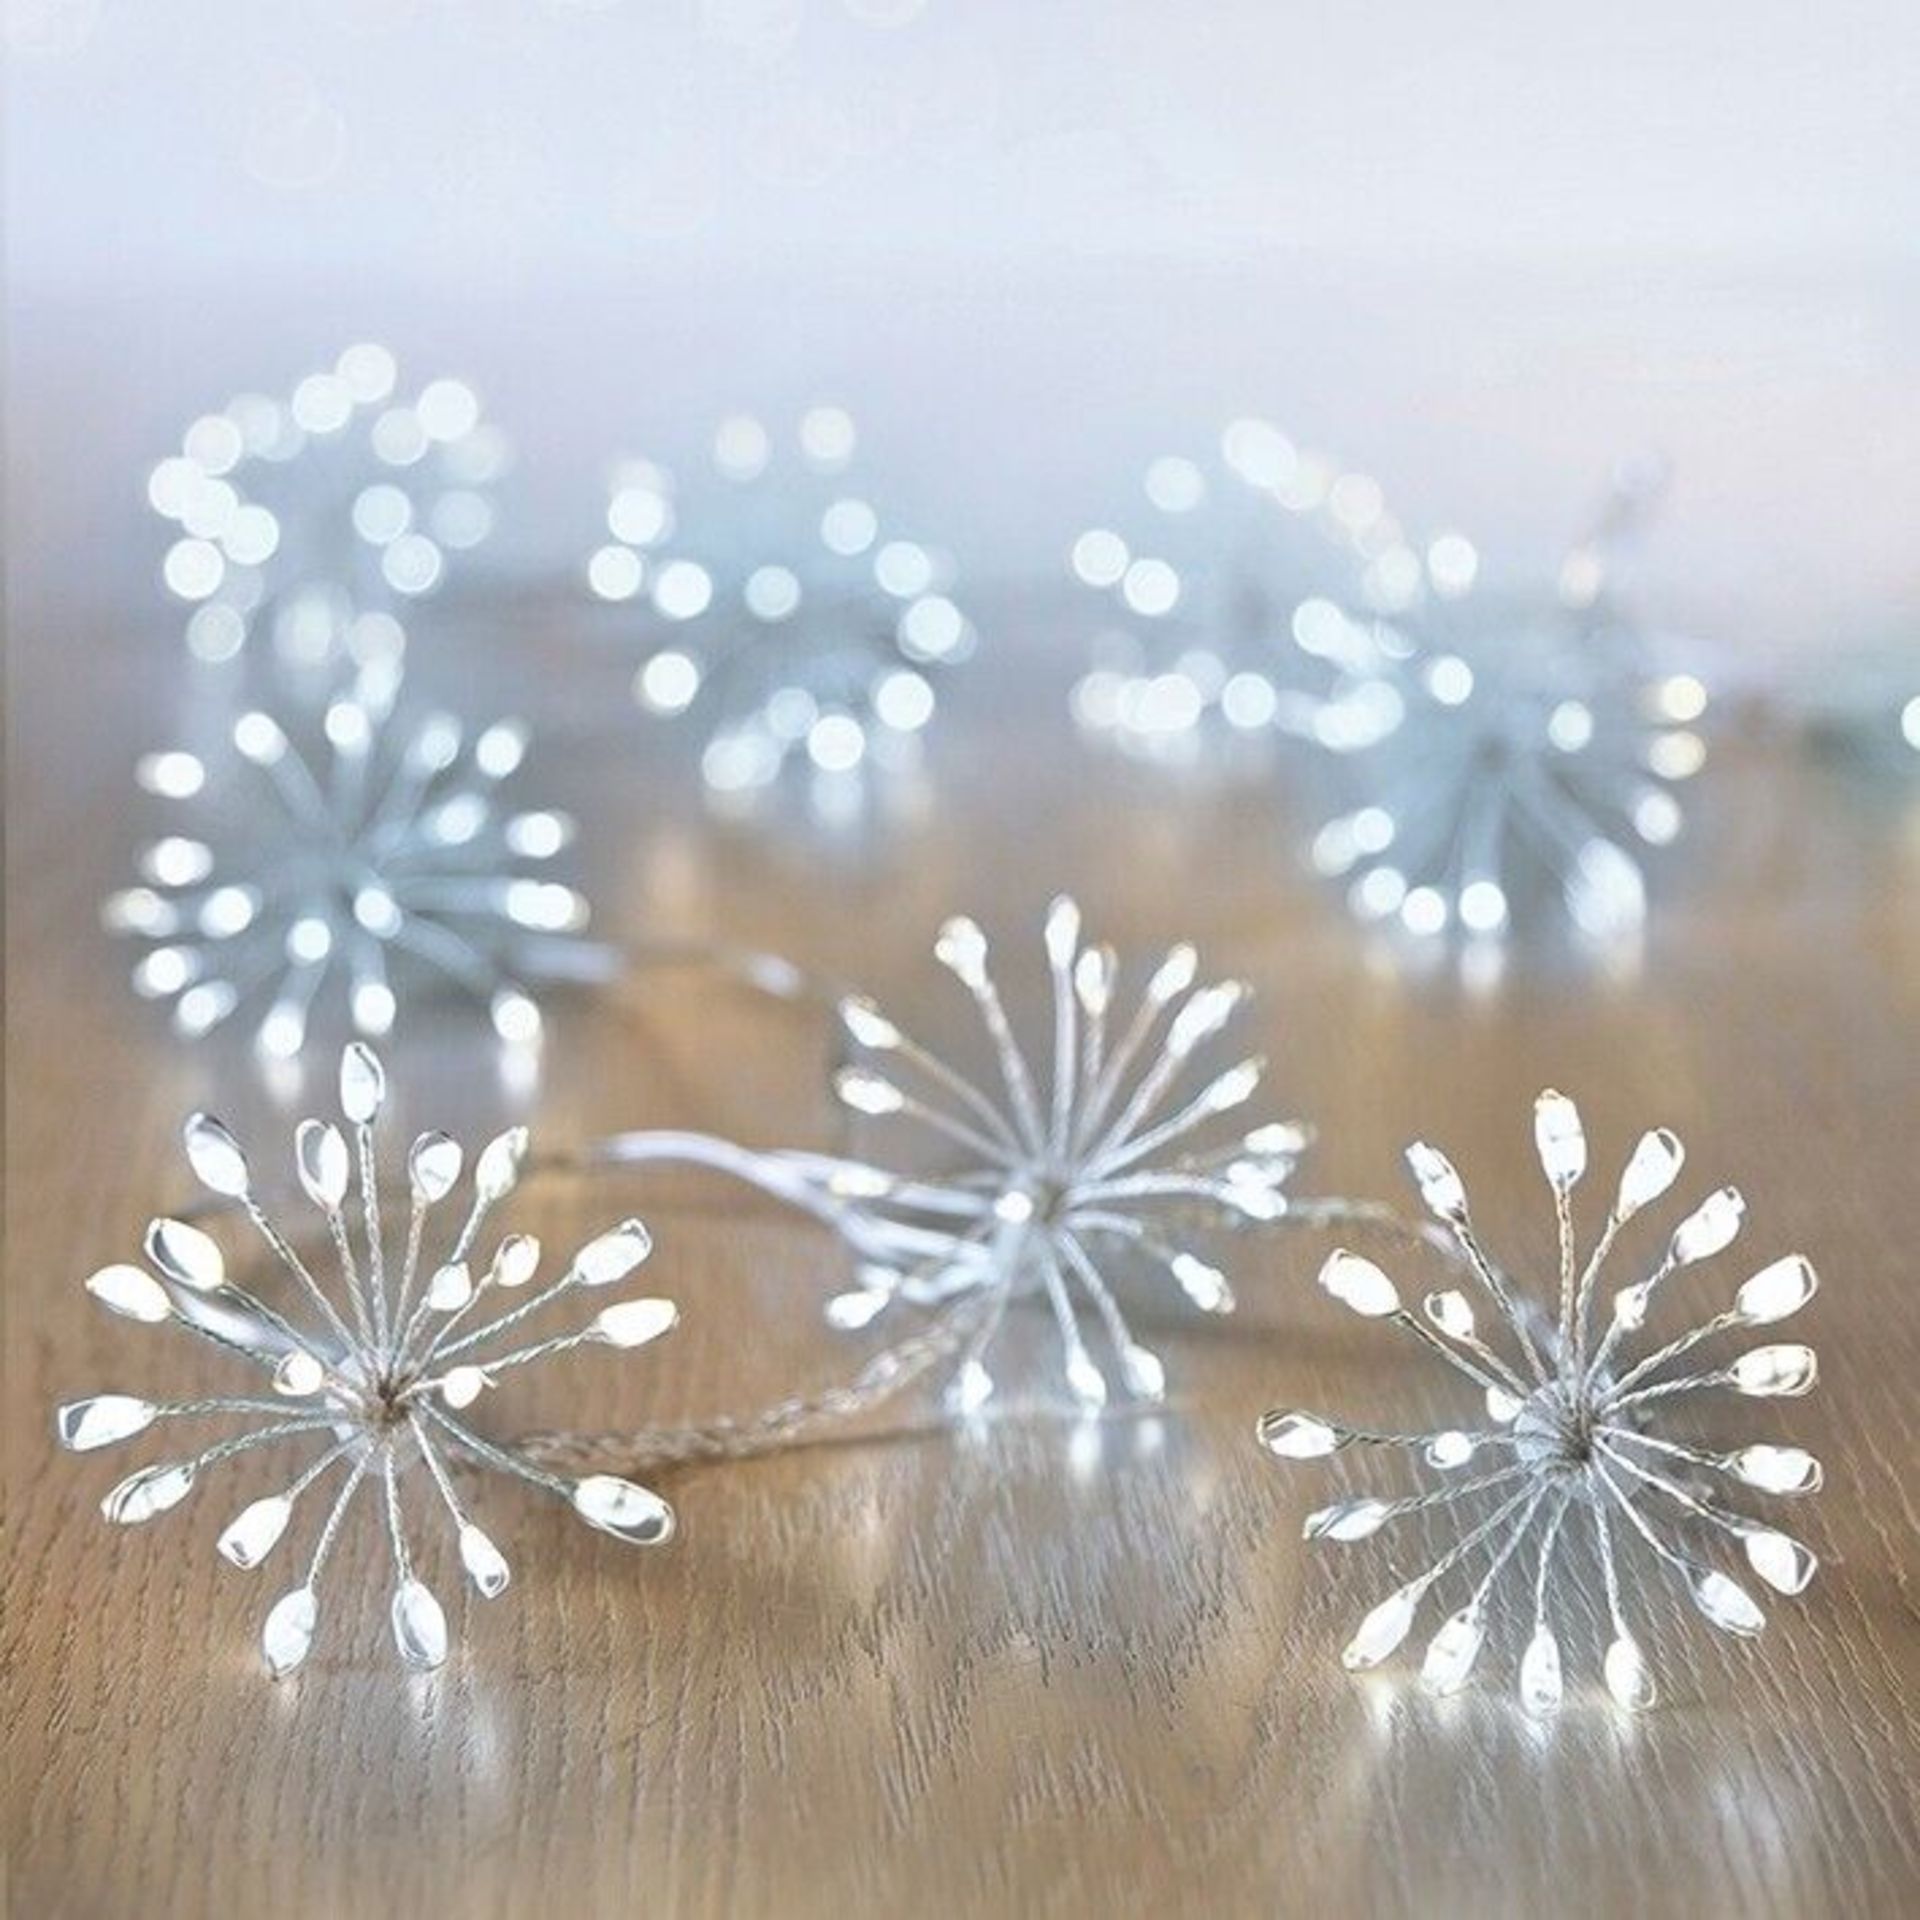 PREMIER ULTRABRIGHTS STARBURST 200 PINWIRE LEDS WHITE - Image 2 of 4